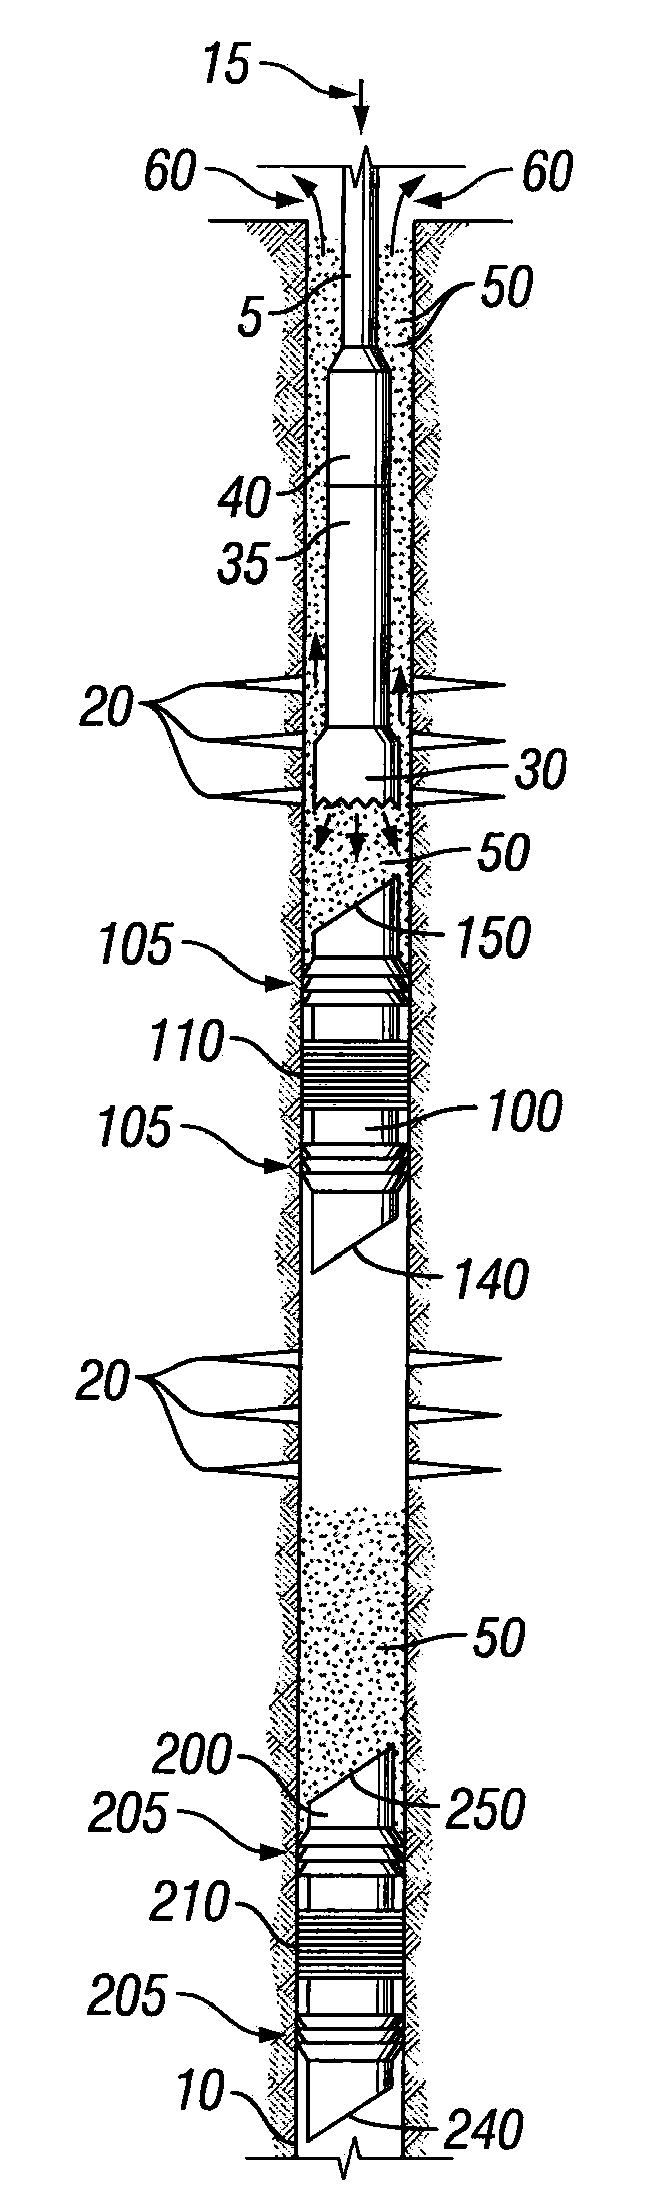 Mill and method for drilling composite bridge plugs